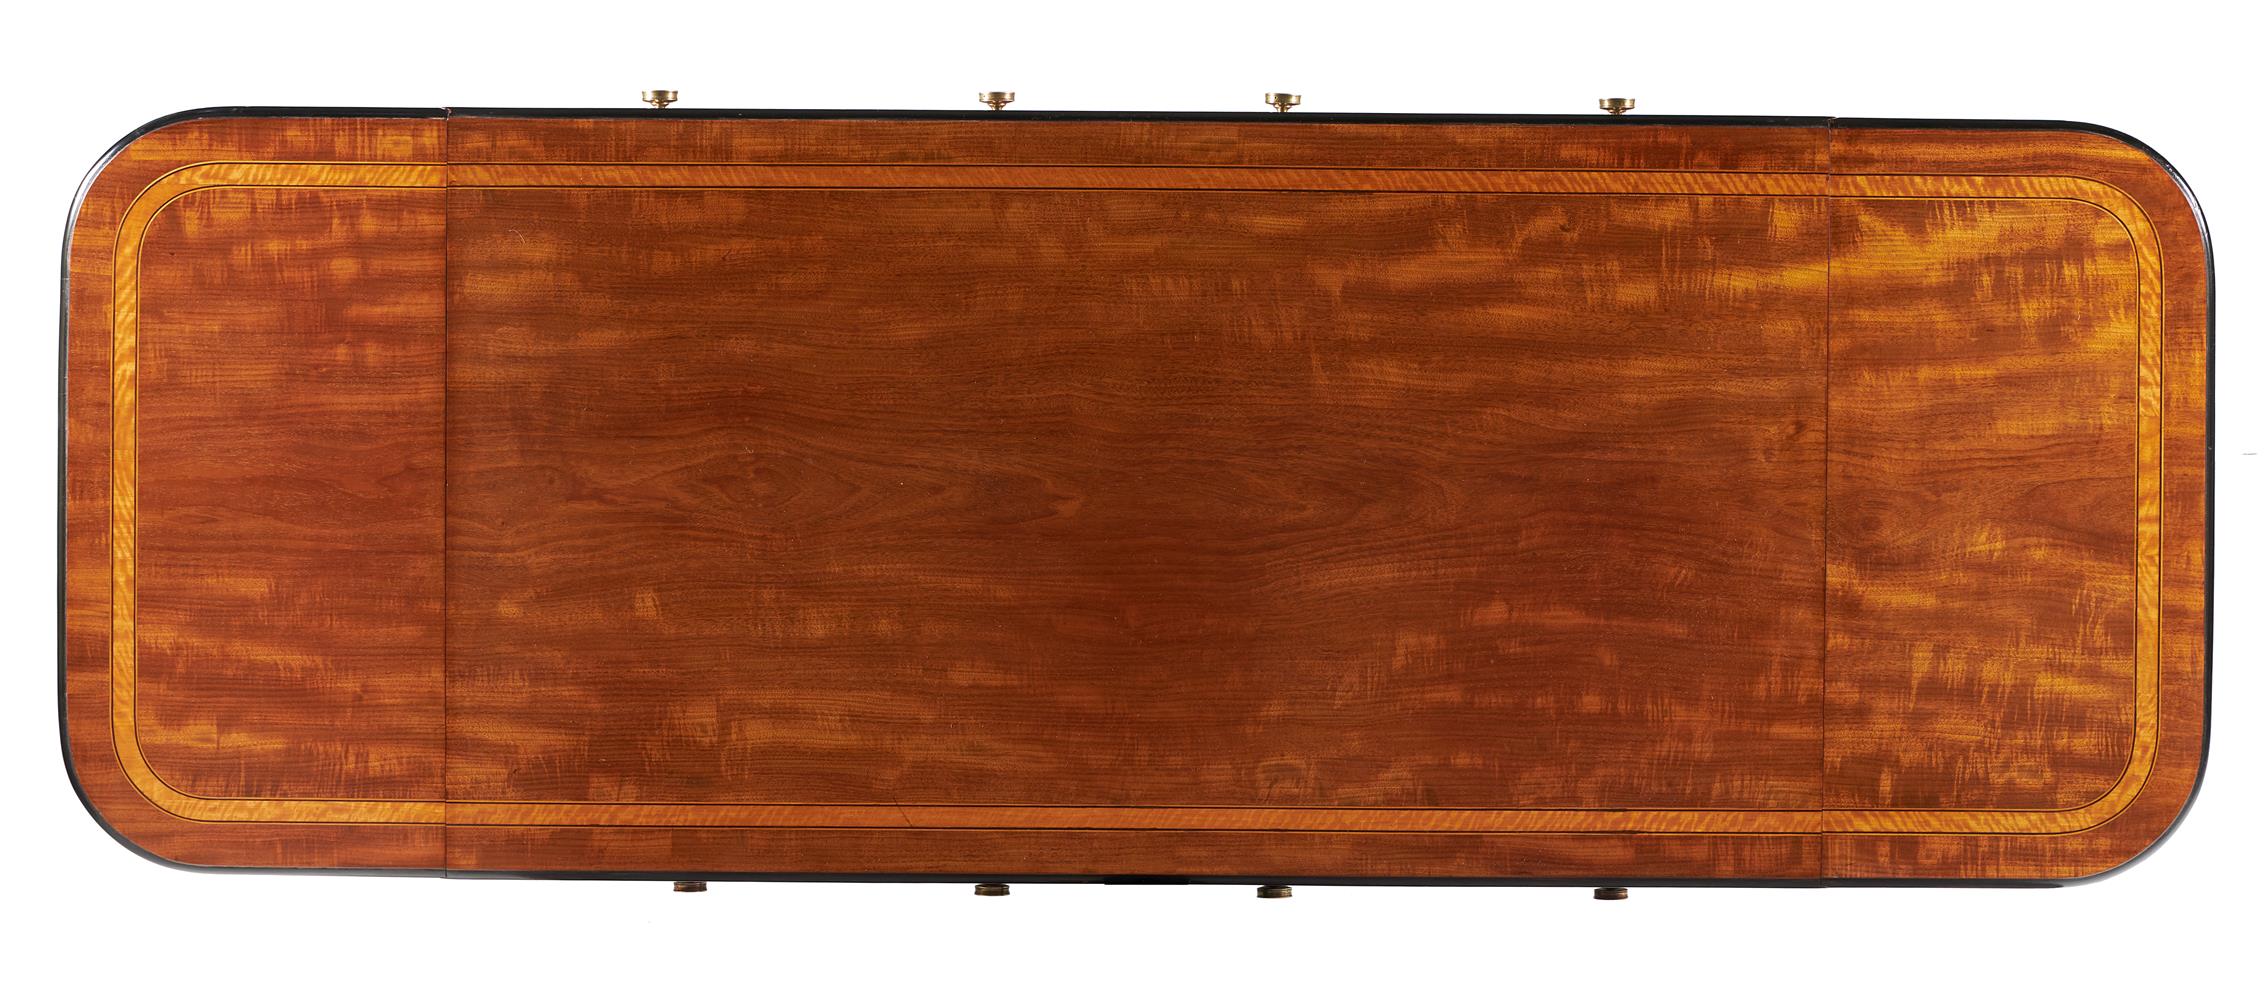 Y A GEORGE III SATINWOOD SOFA TABLE, ATTRIBUTED TO GILLOWS, CIRCA 1790 - Image 6 of 6